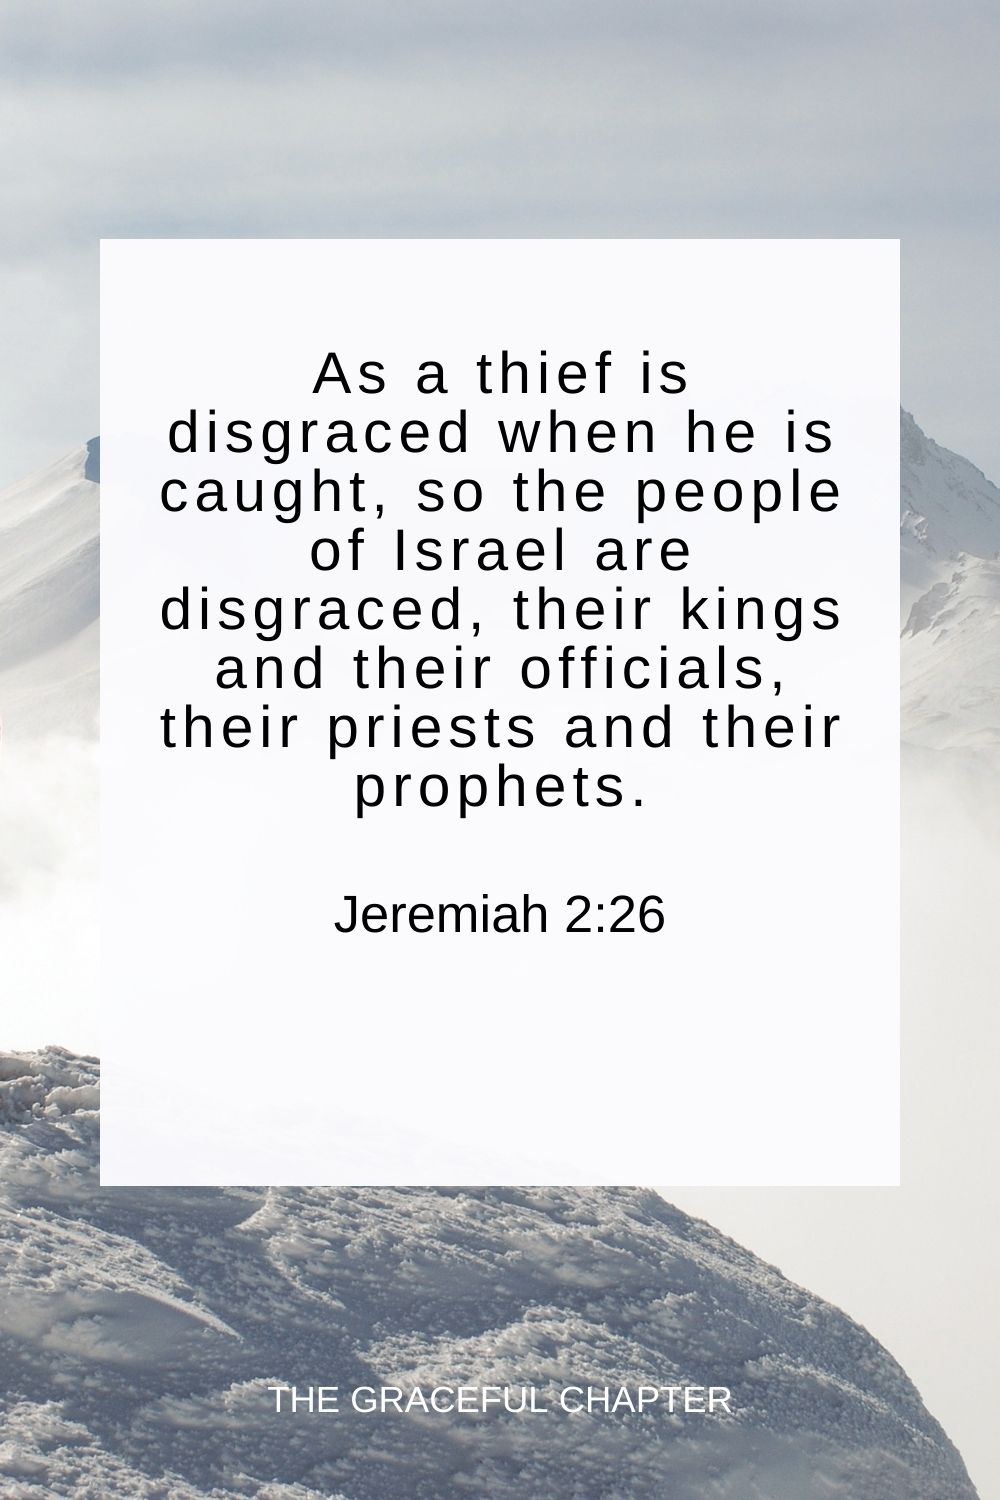 As a thief is disgraced when he is caught, so the people of Israel are disgraced, their kings and their officials, their priests and their prophets. Jeremiah 2:26